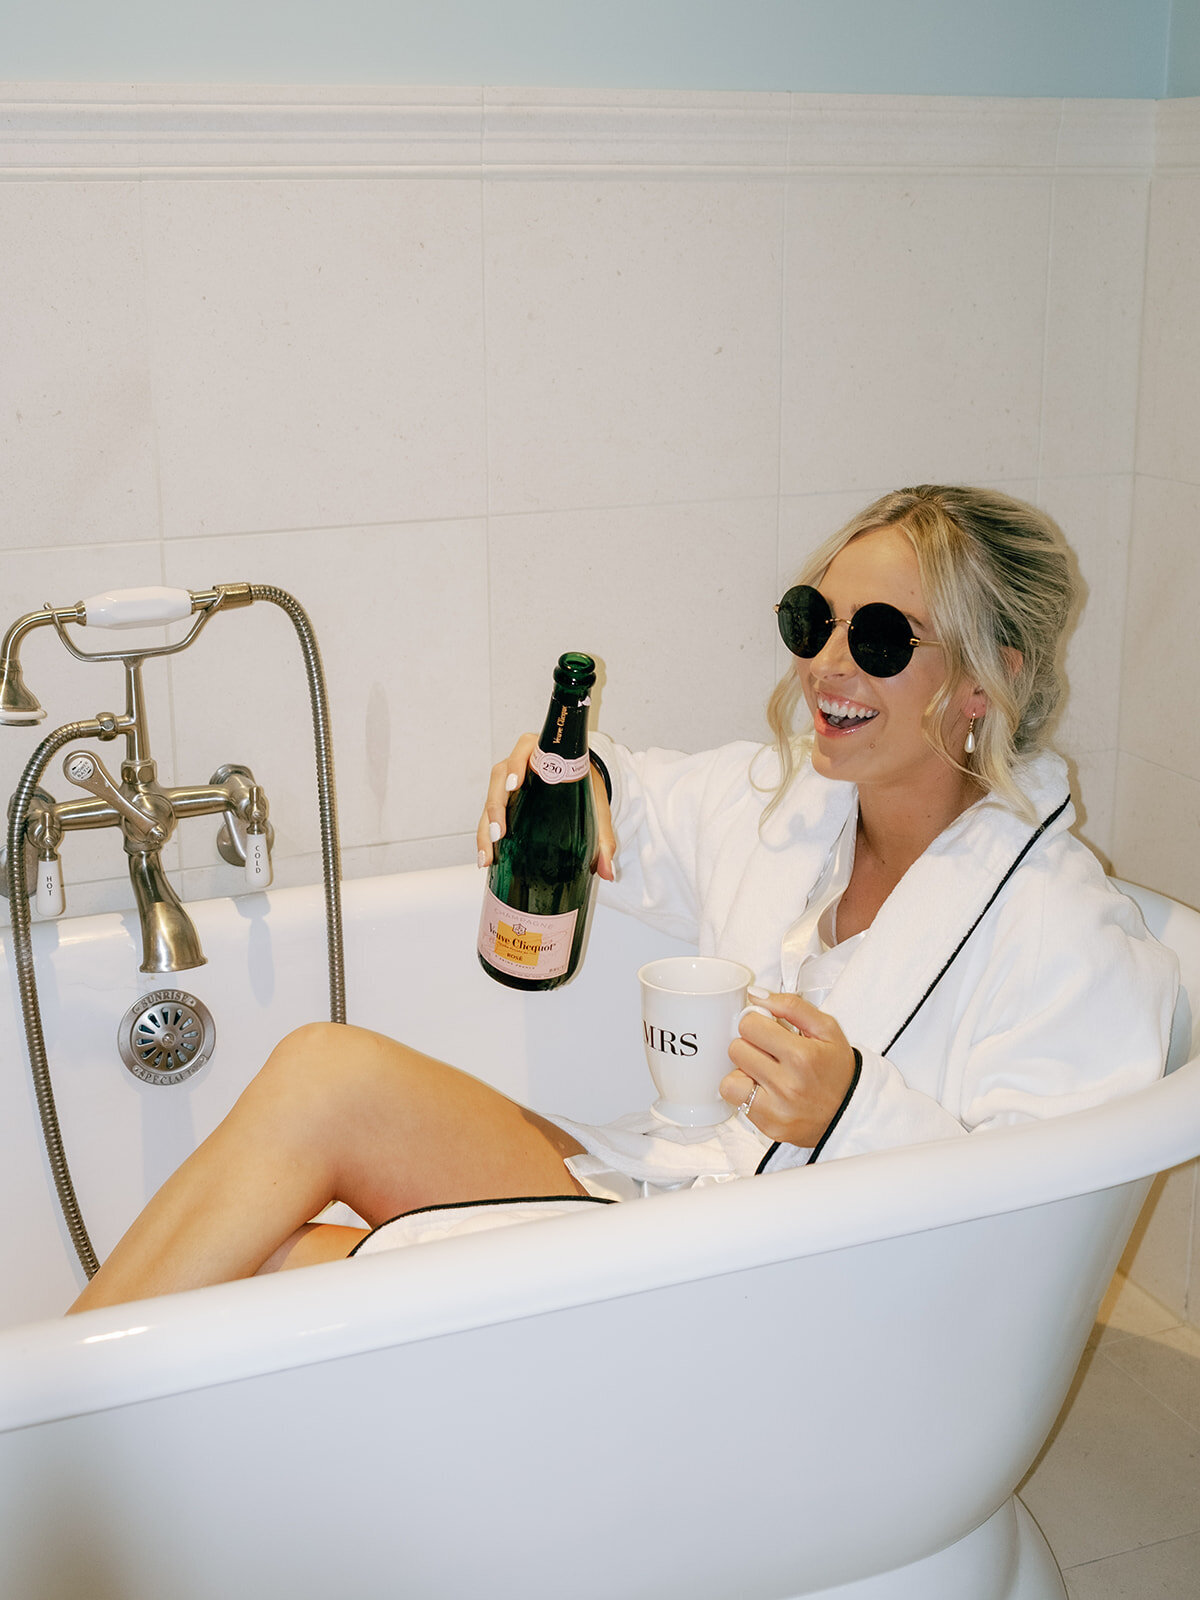 Bride celebrates by ouring champagne and hanging on a bath tub on her wedding morning.